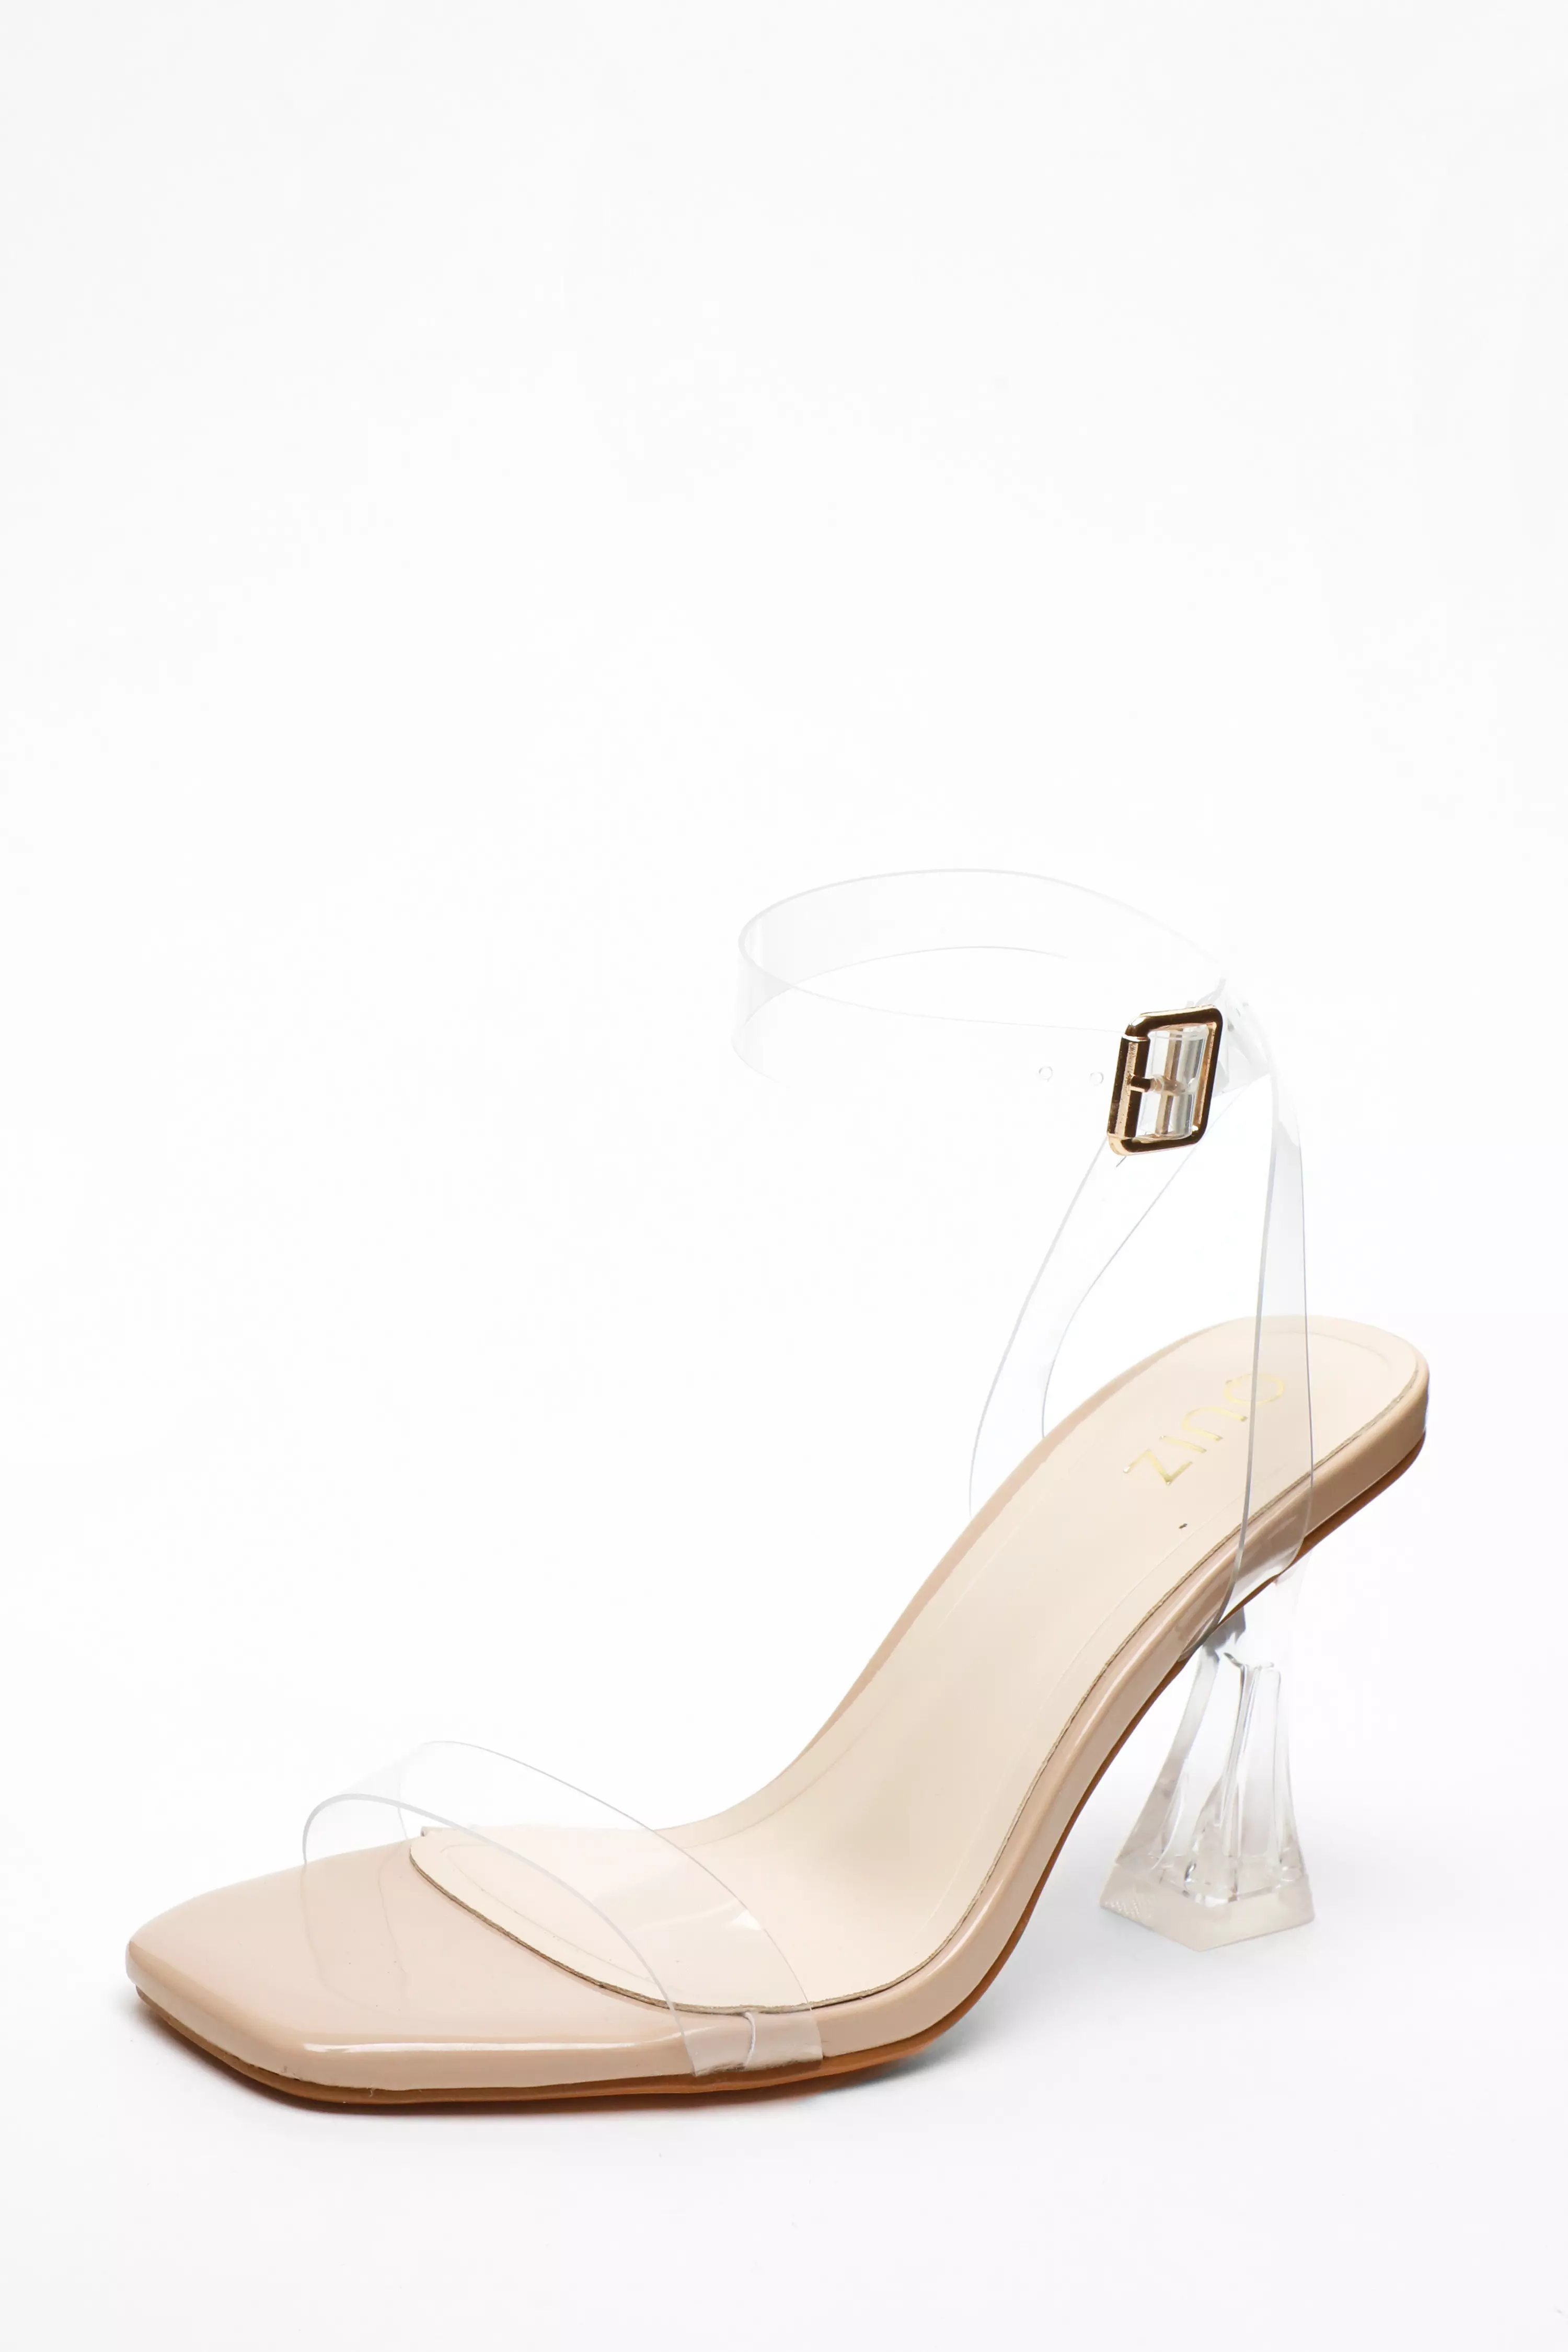 Clear Flared Heeled Sandals - QUIZ Clothing